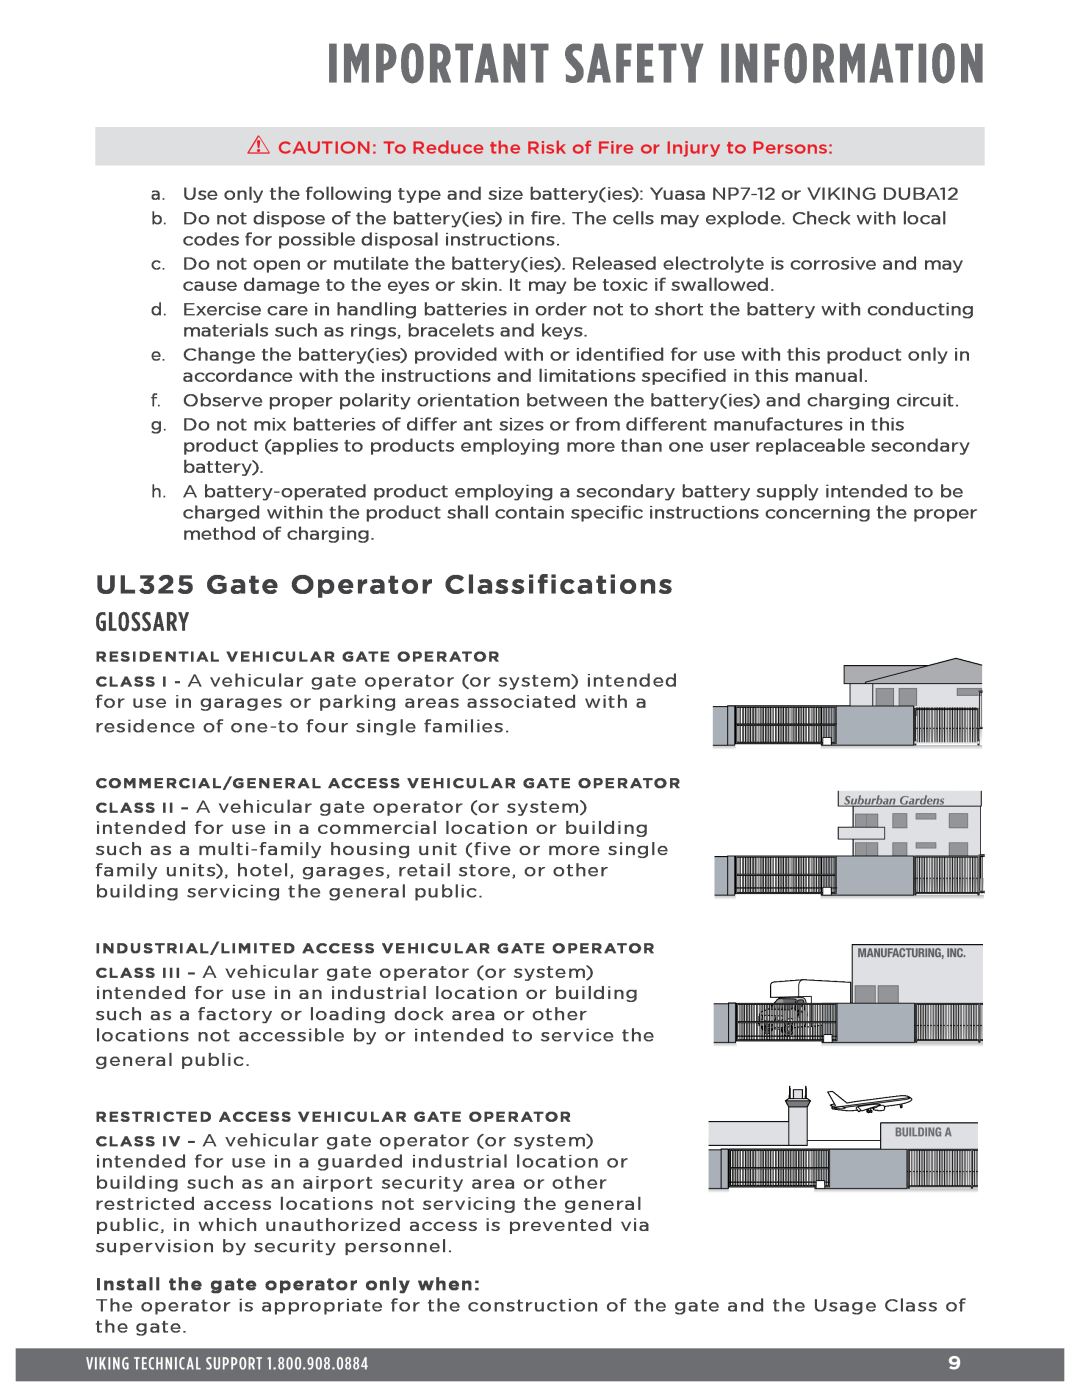 Viking Access Systems Q7 manual UL325 Gate Operator Classifications, Glossary, Important Safety Information 